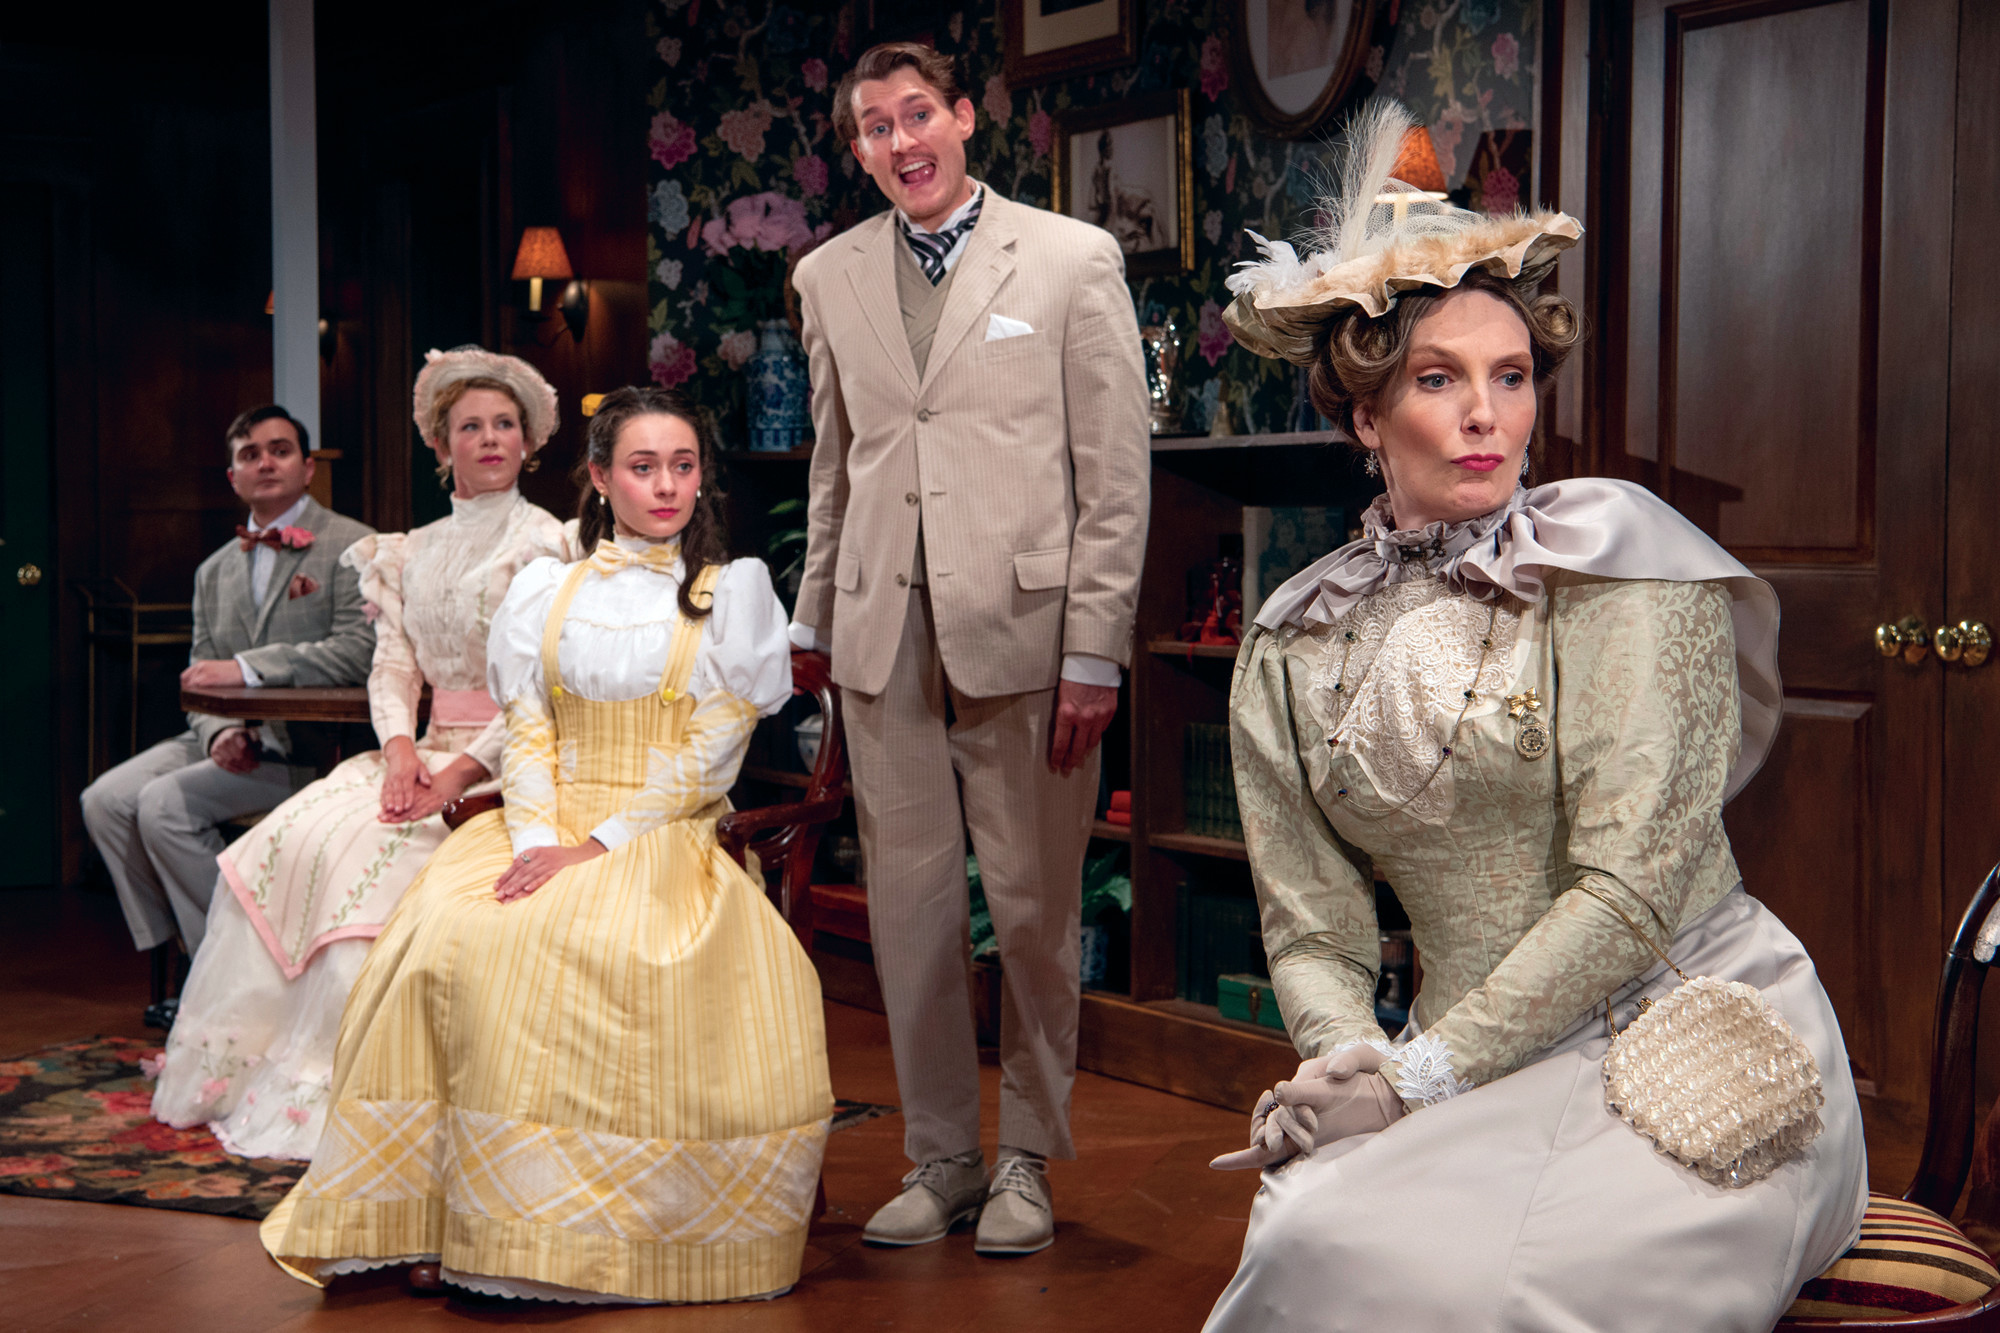 Marc Dante Mancini (Algernon Moncrieff), Nora Eschenheimer (Gwendolen Fairfax), Alison Russo (Cecily Cardew), Jeff Church (John Worthing, J.P.) and Deb Martin (Lady Bracknell) in Gamm’s “The Importance of Being Earnest,  Trivial Play For Serious People.”